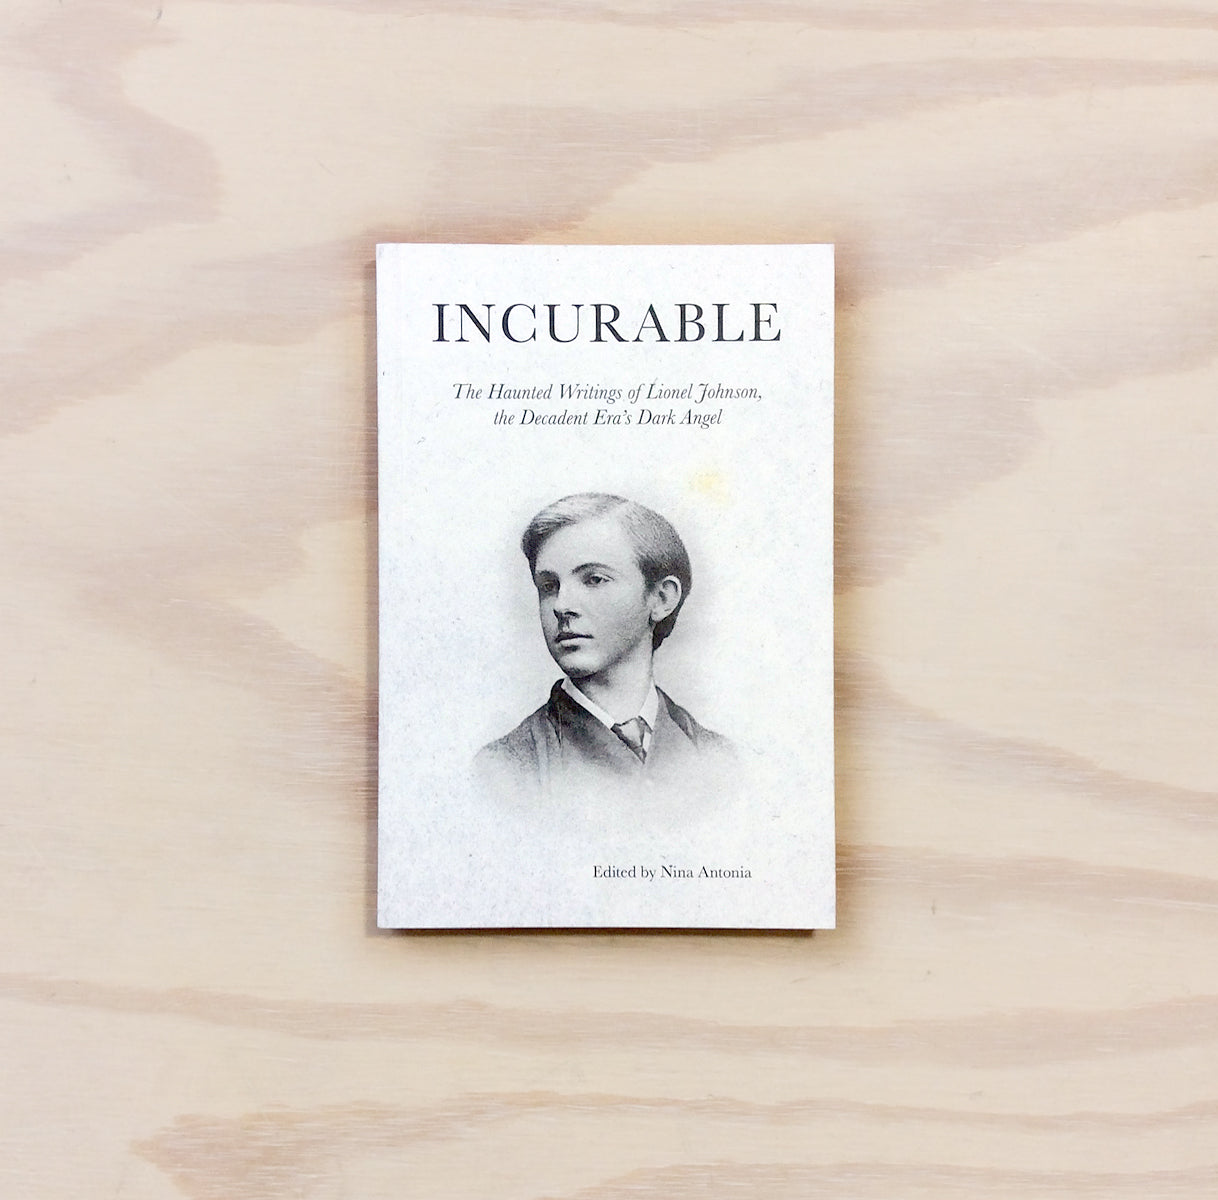 Incurable: The Haunted Writings of Lionel Johnson, the Decadent